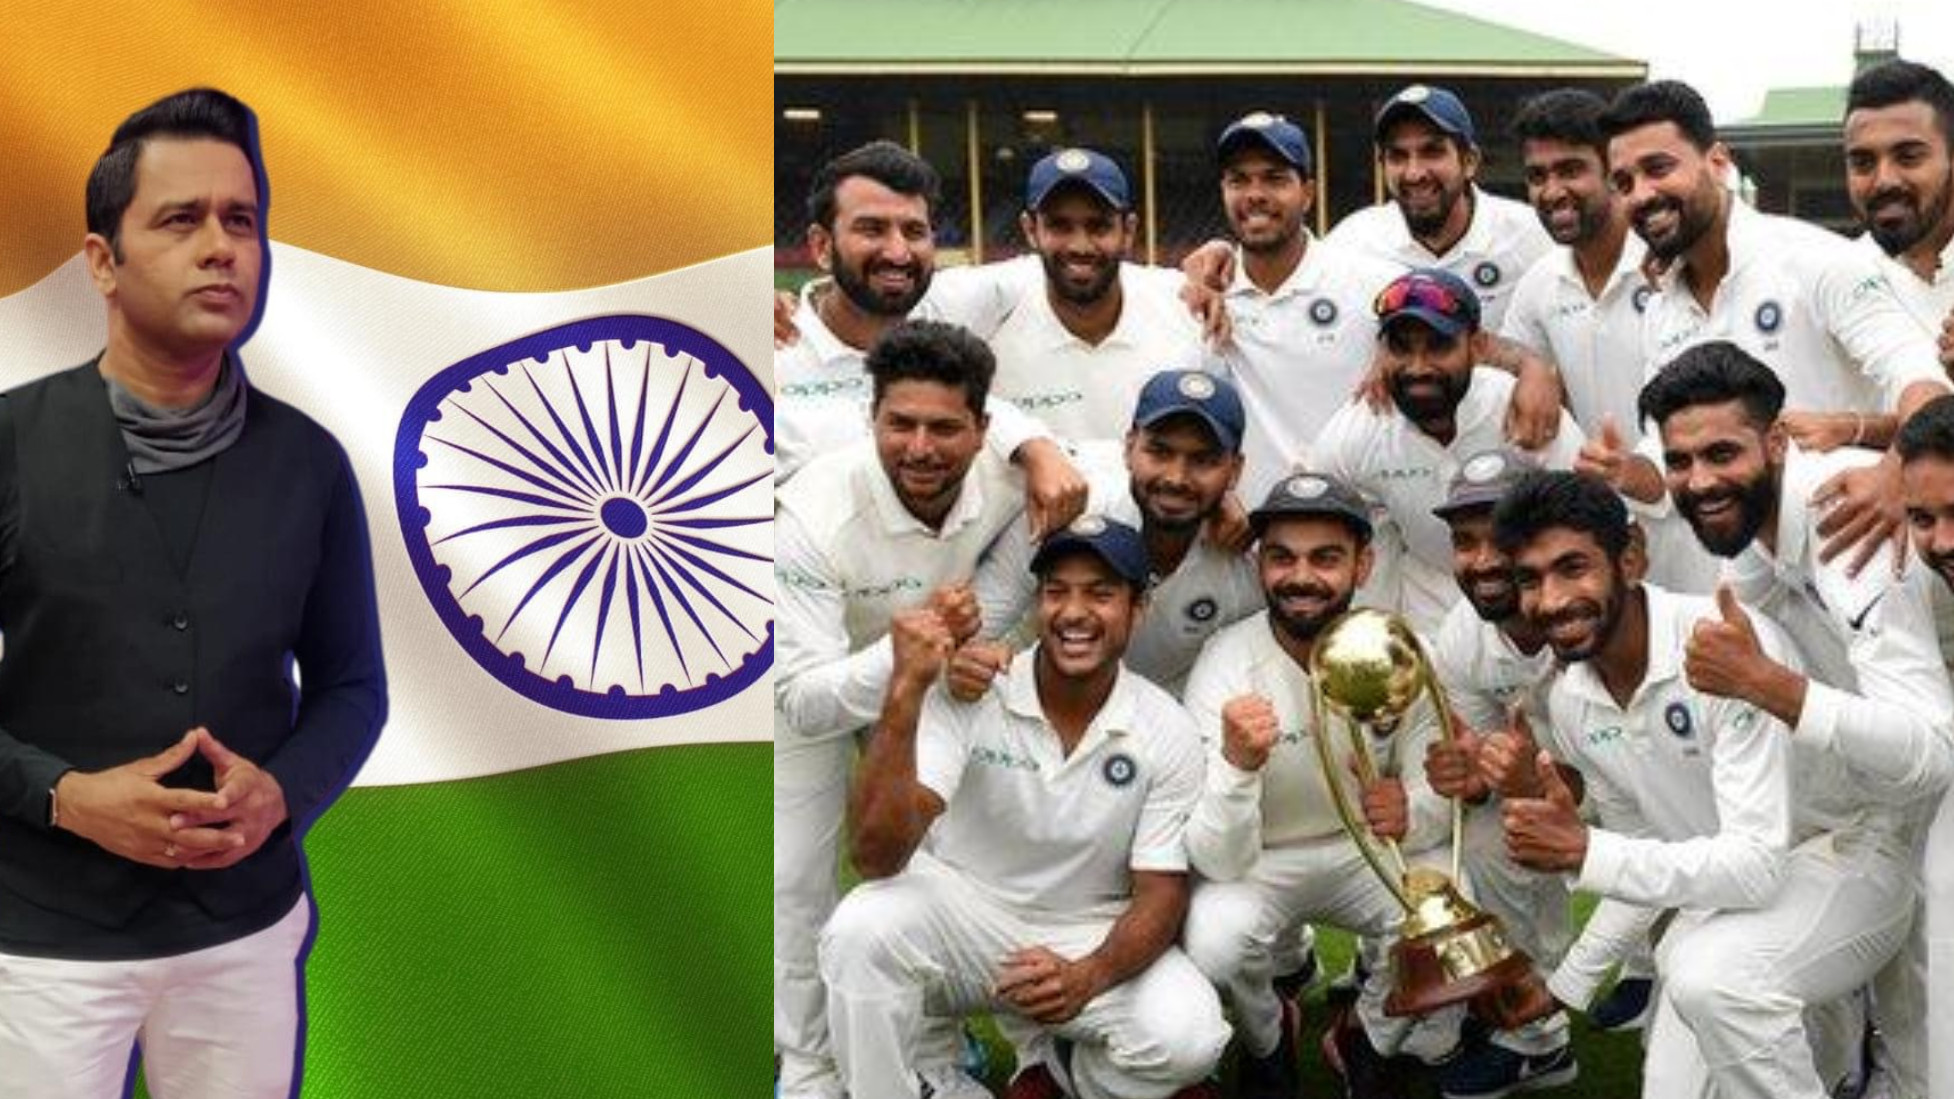 '16 against a country'- Aakash Chopra recalls hugging the Indian flag in the middle of broadcast